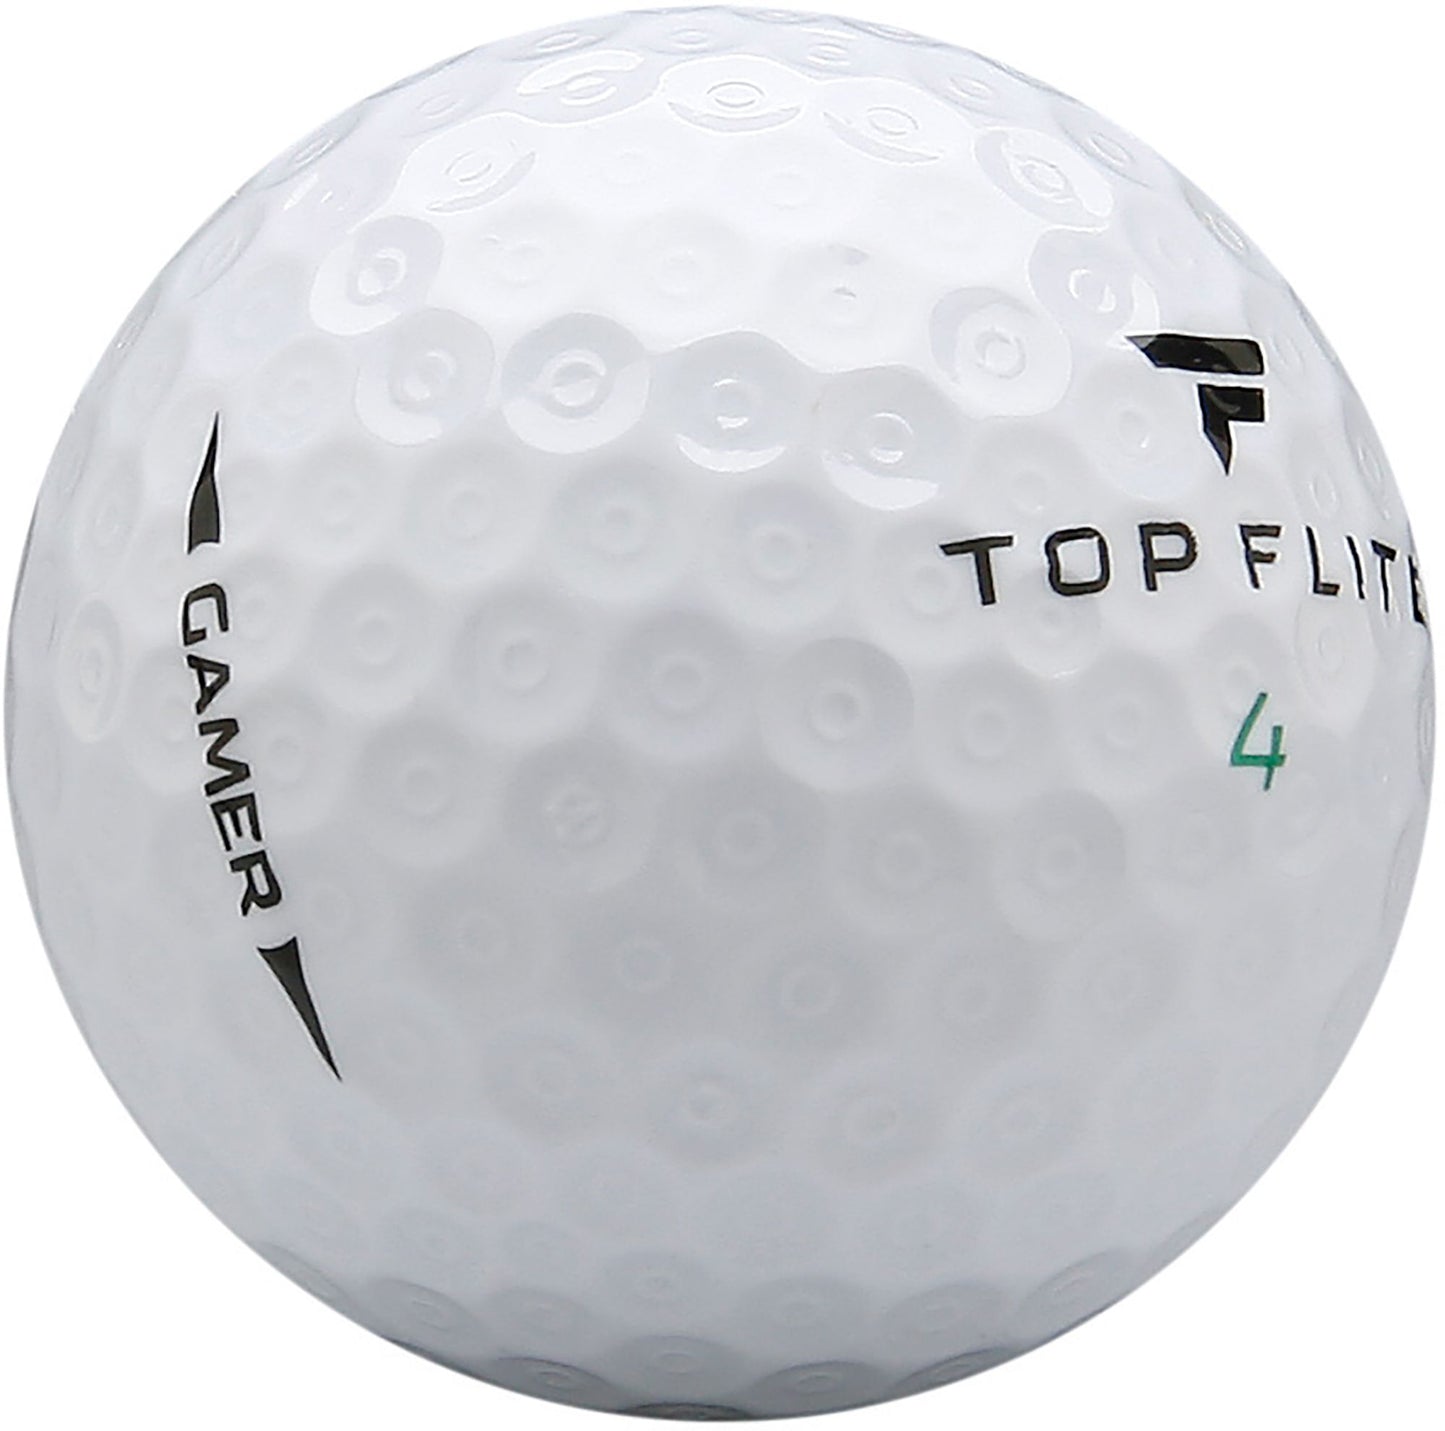 Top Gamer and Recycled Golf Balls – golfballs.net